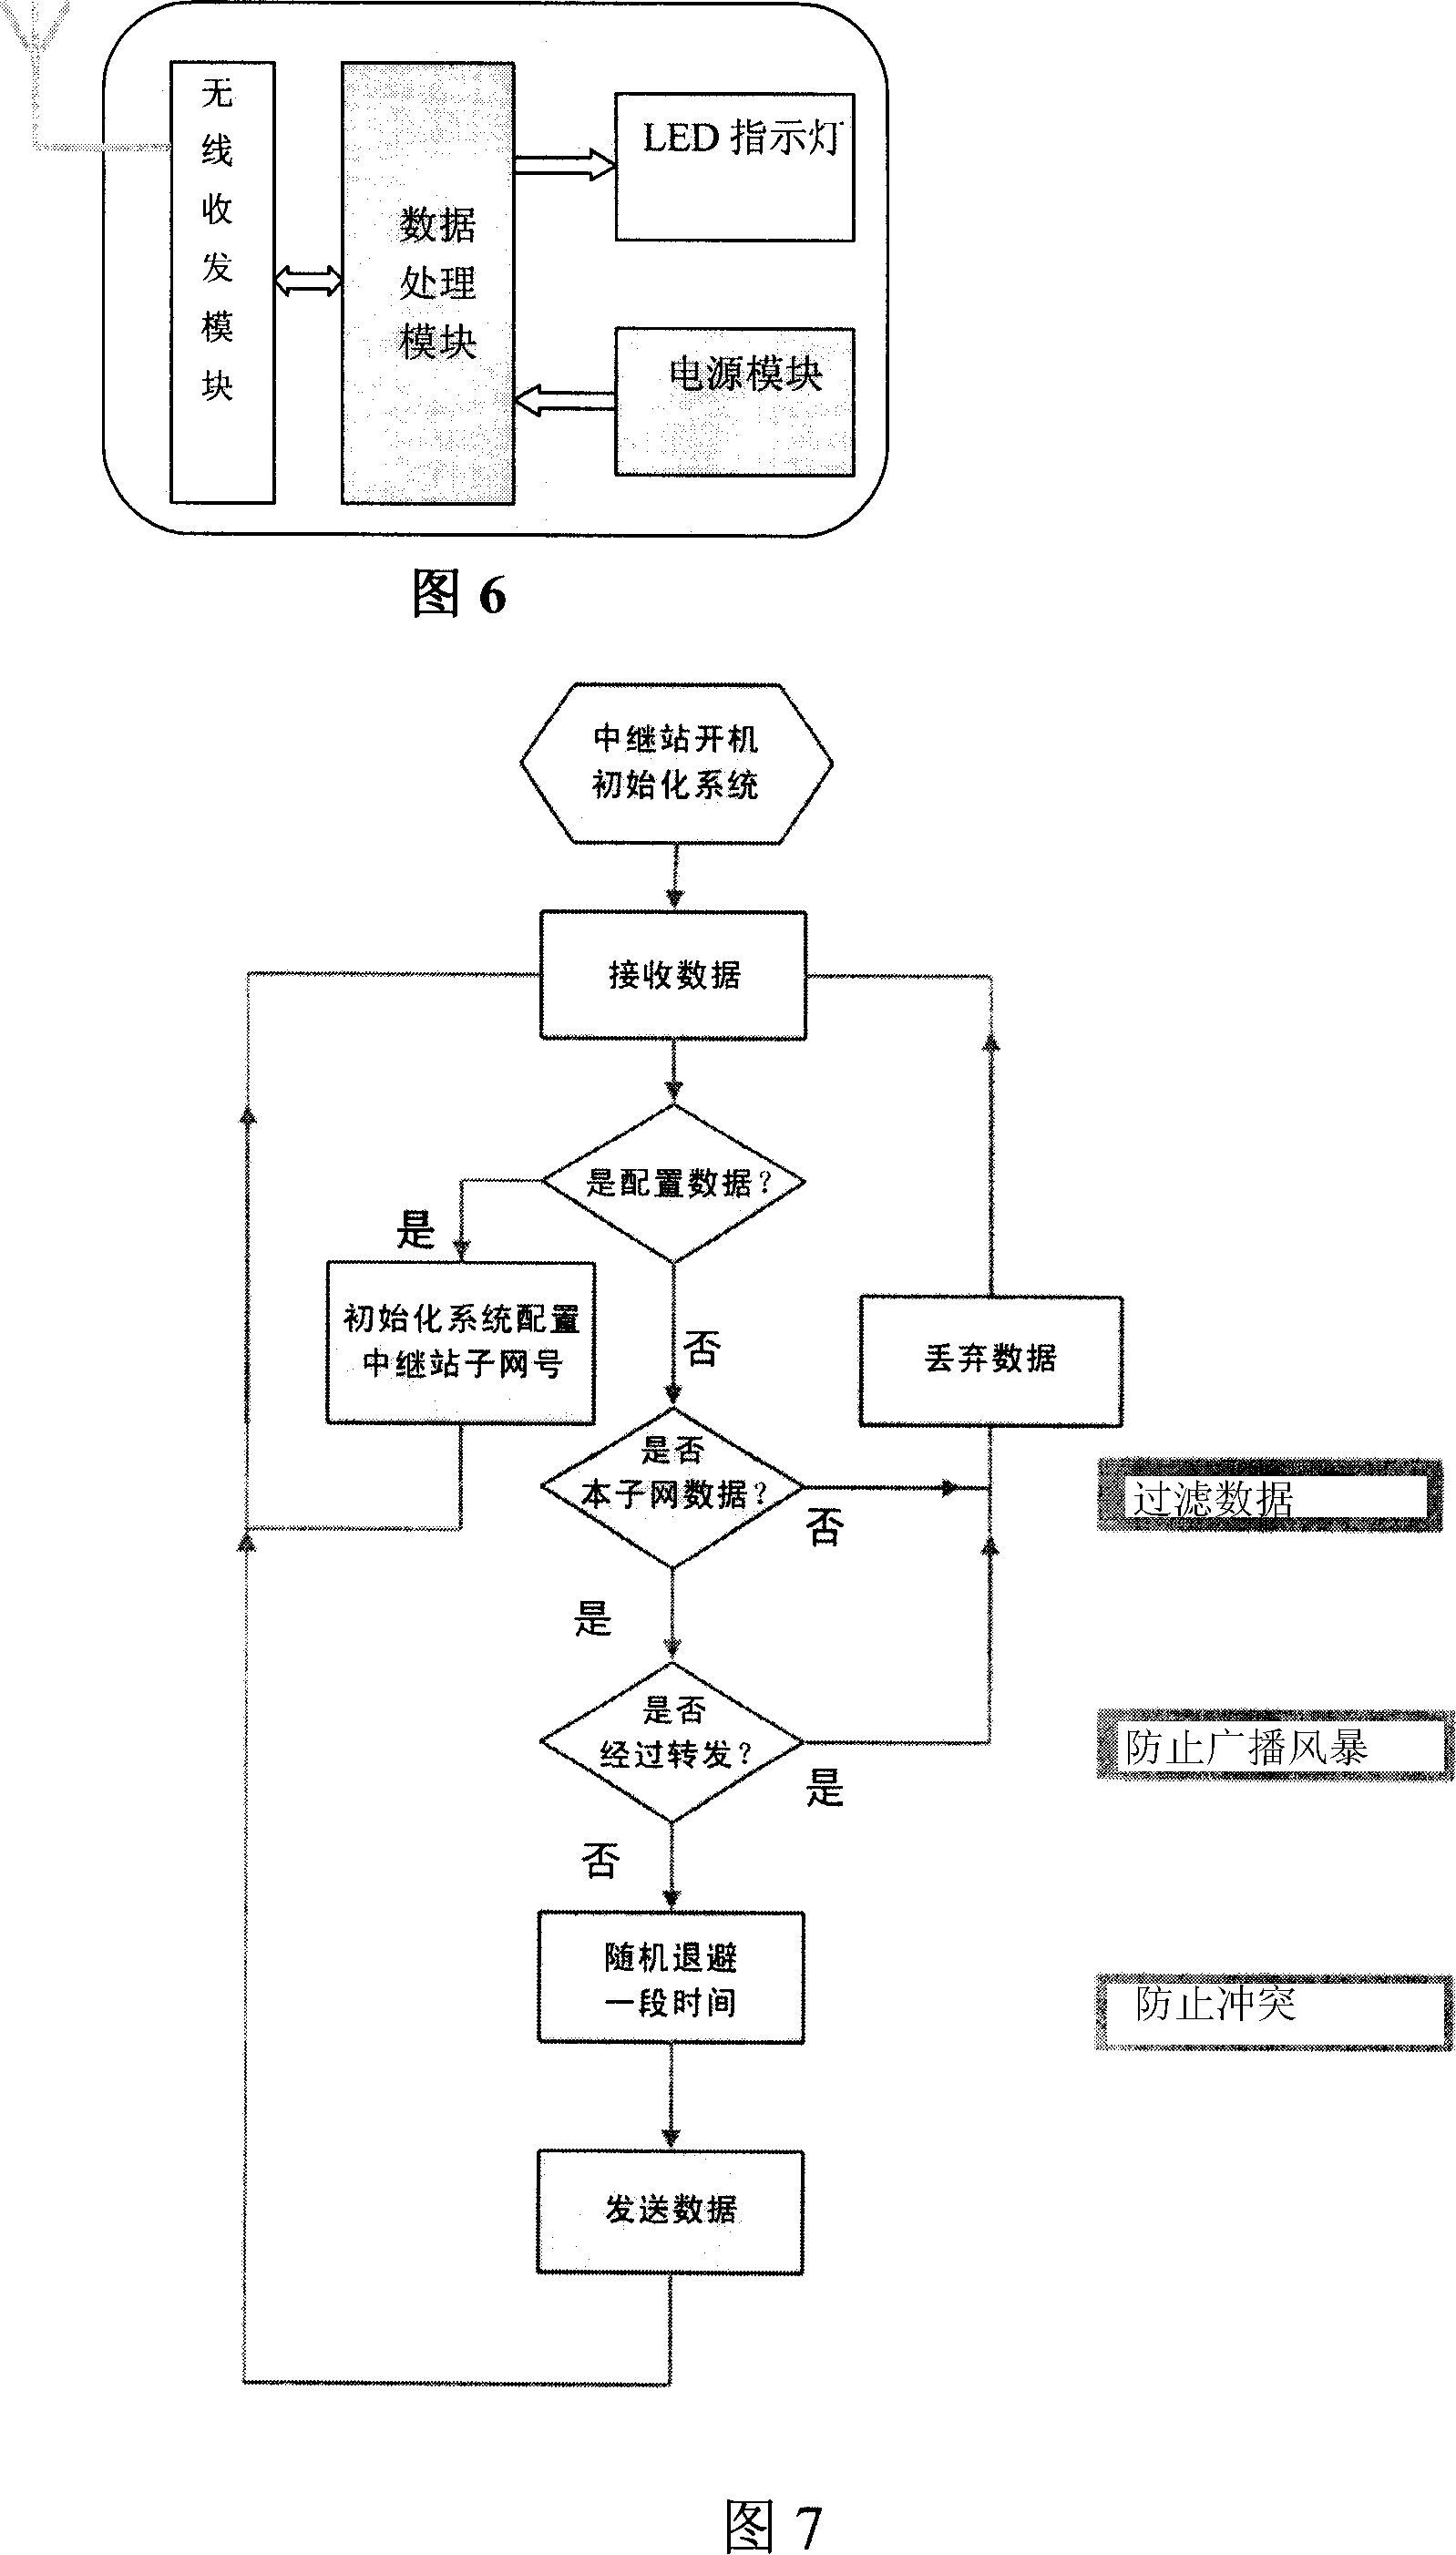 Wireless intelligent tutelage system and method for medical treatment